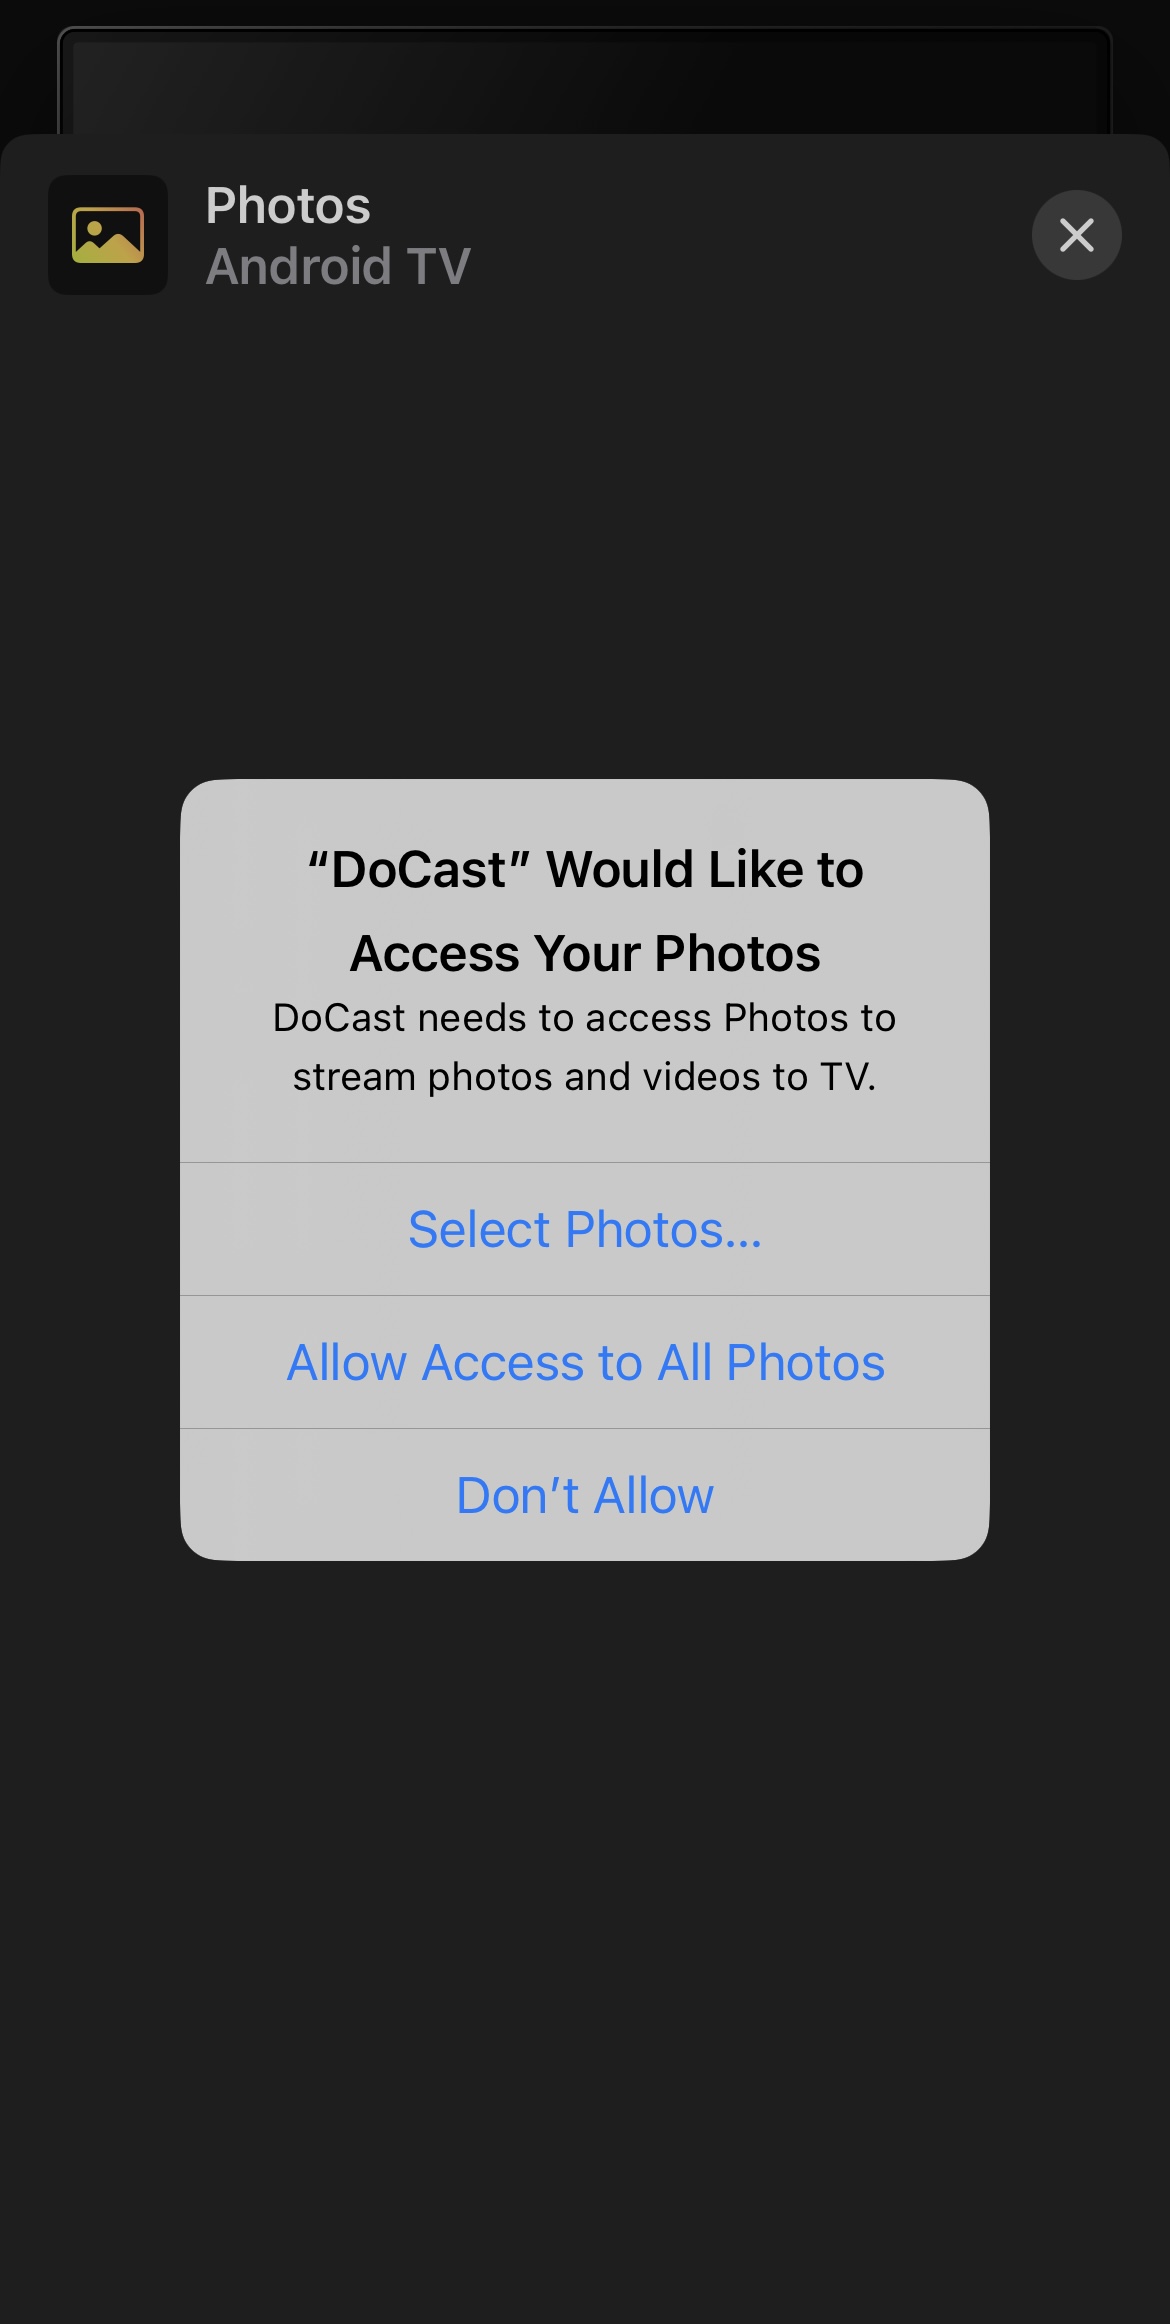 Giving the DoCast app access to photos on iPhone